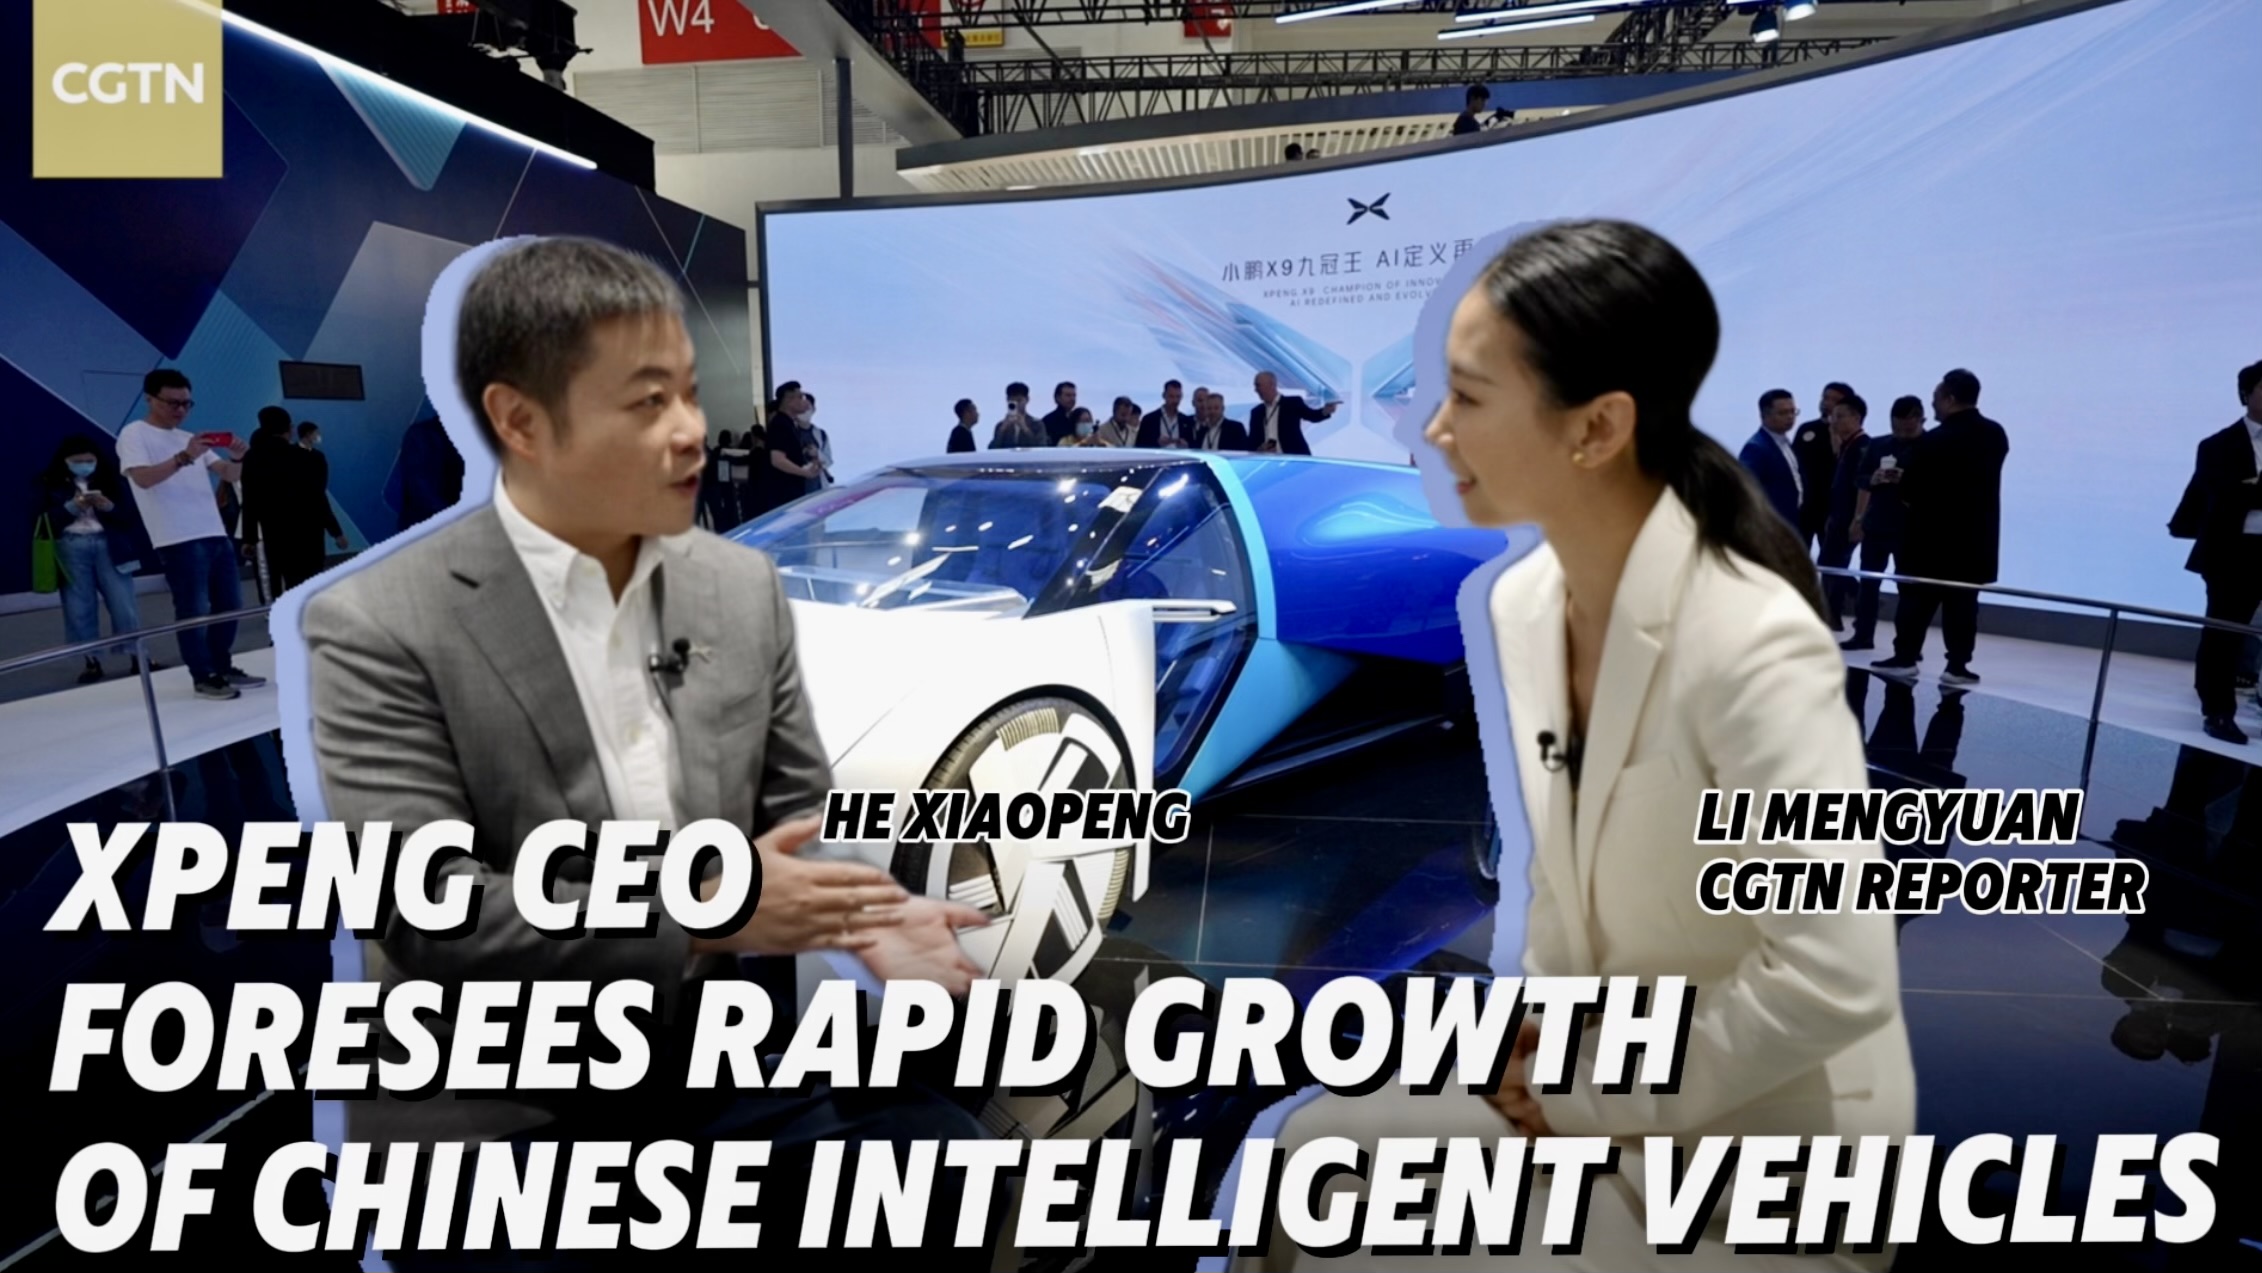 XPENG CEO foresees rapid growth of Chinese intelligent vehicles